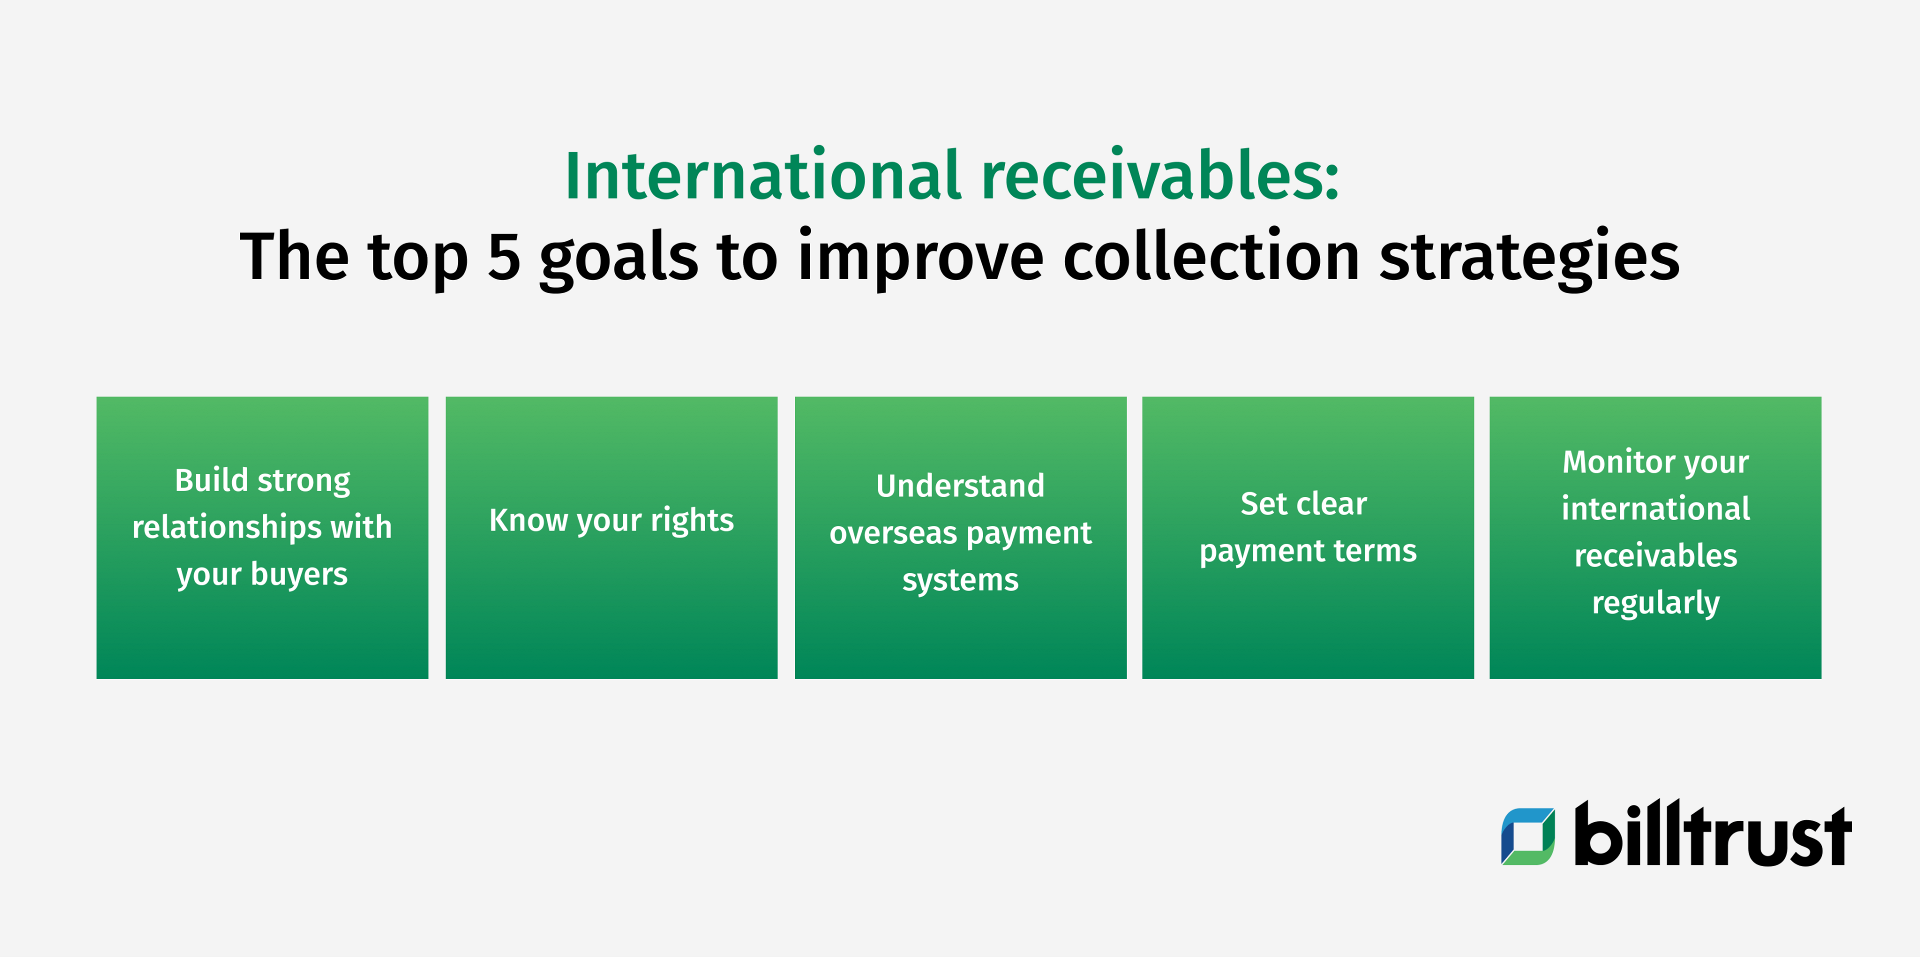 the top 5 goals to improve collection strategies: strong relationships, know your rights, understand overseas payment systems, clear payment terms and monitor international receivables